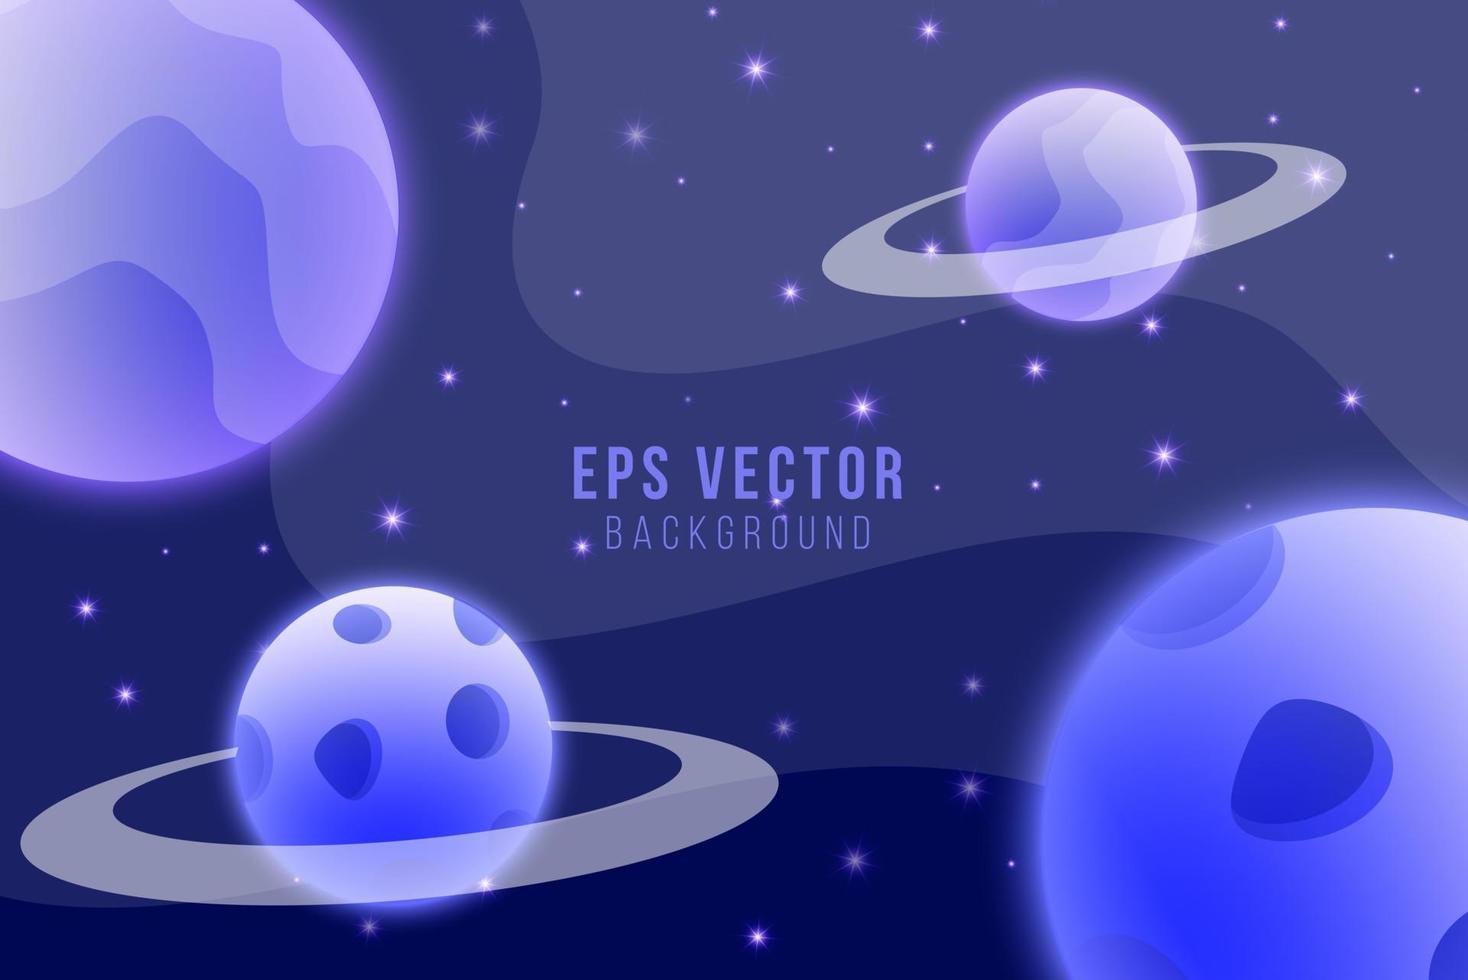 Dark blue space planet background illustration vector with stars and gradient effect. can use for poster, business banner, flyer, advertisement, brochure, catalog, web, site, website, presentation